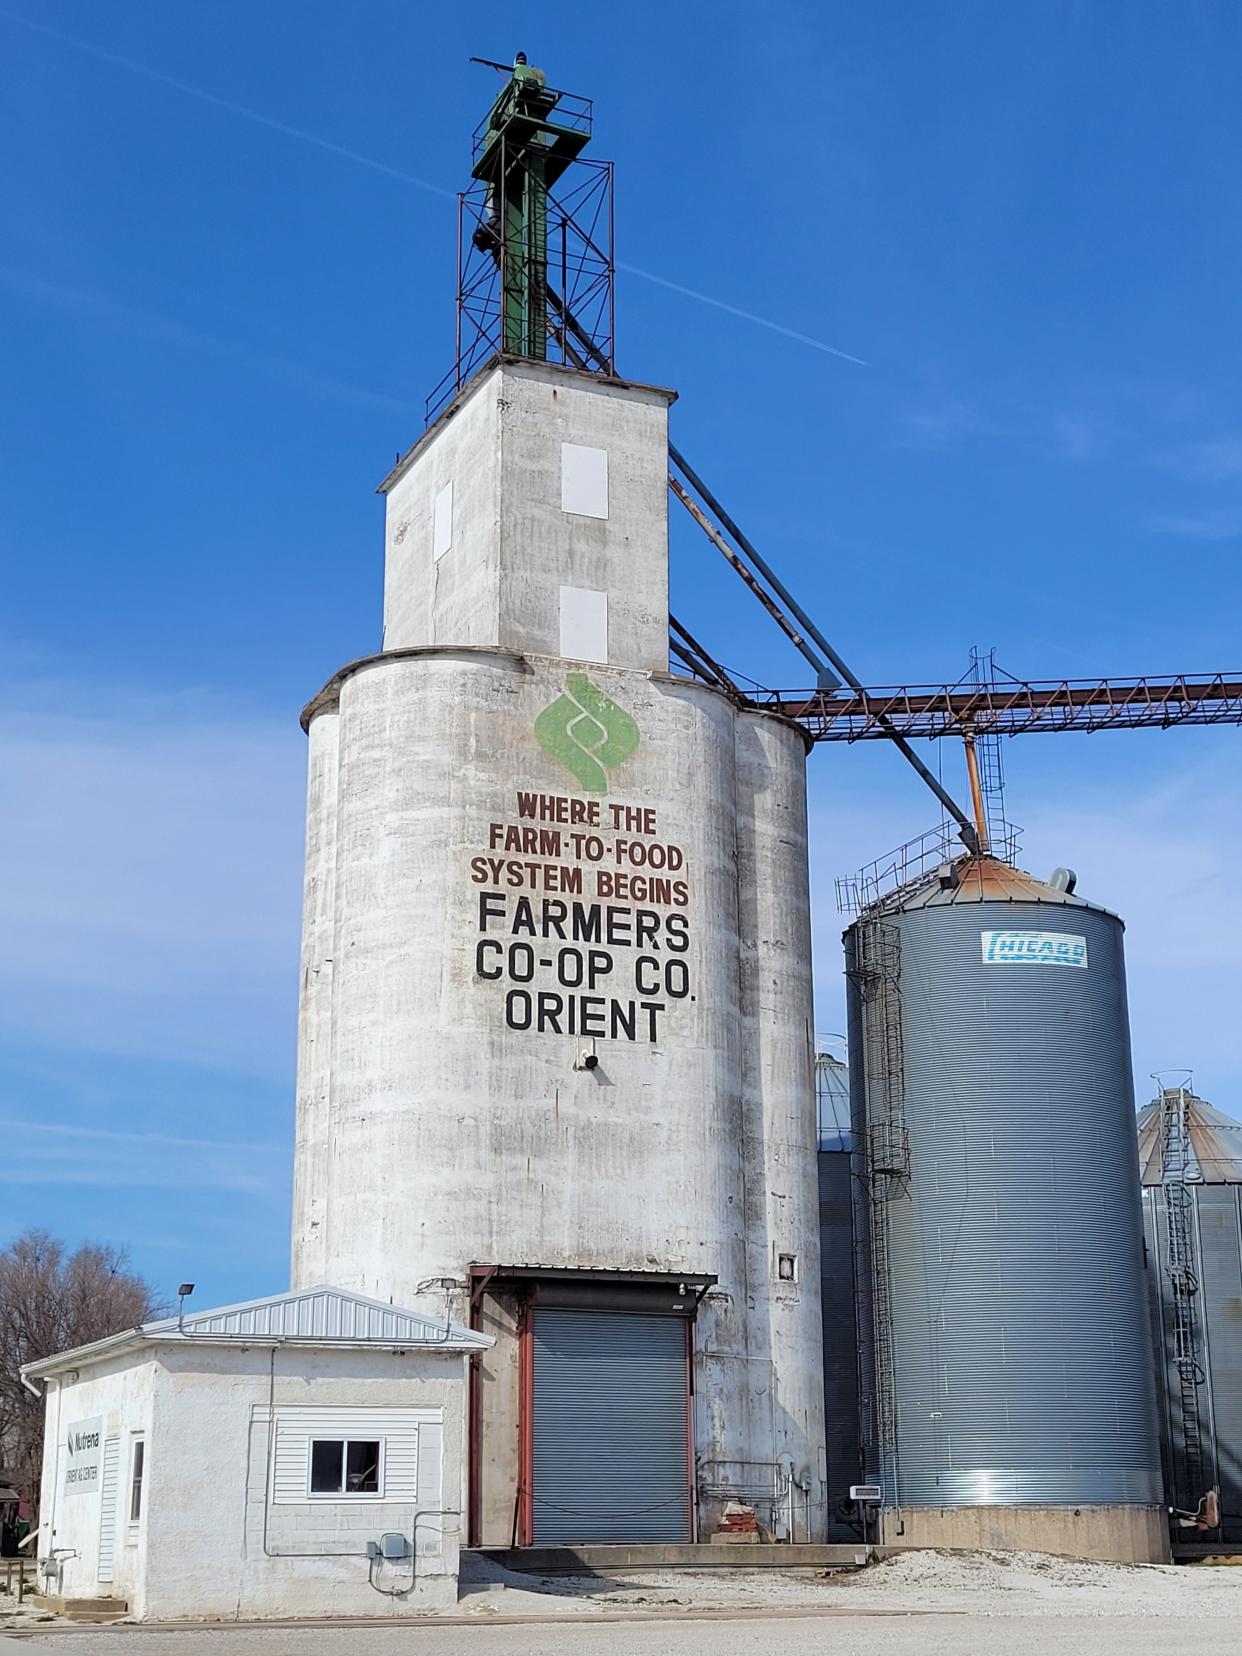 An elevator in Orient, an Adair County town that lost nearly 10% of its population in the last decade. Farmers worry Iowa agriculture could be endangered unless they can get more affordable acess to land.